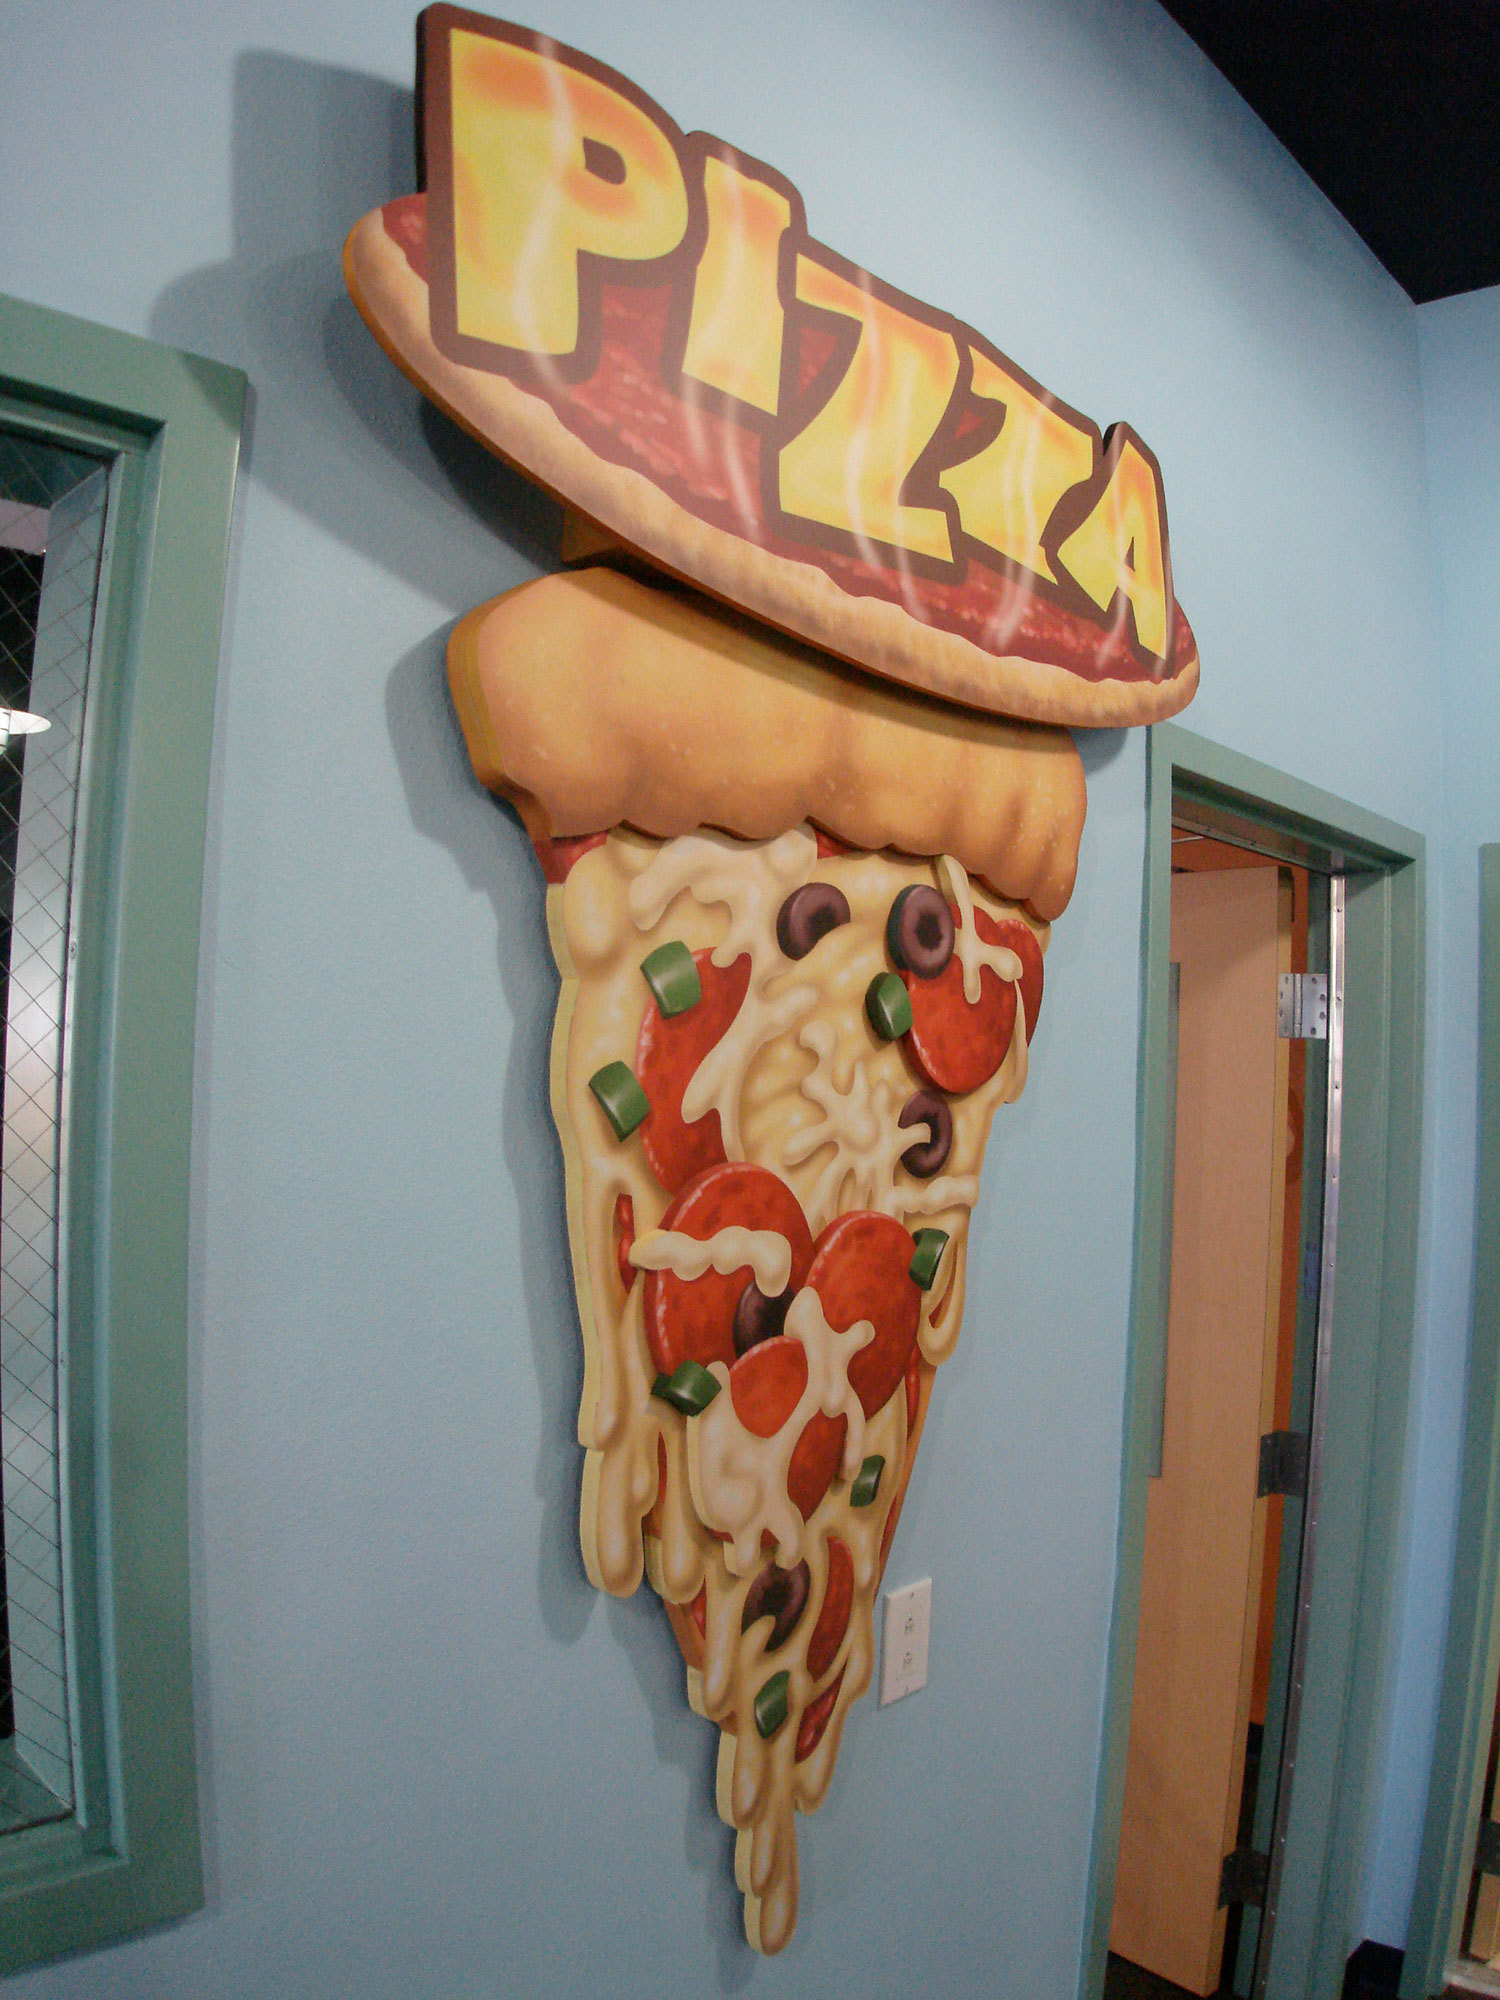 Large 2D Cutout sign of pizza slice and word "Pizza" at Foursquare Church